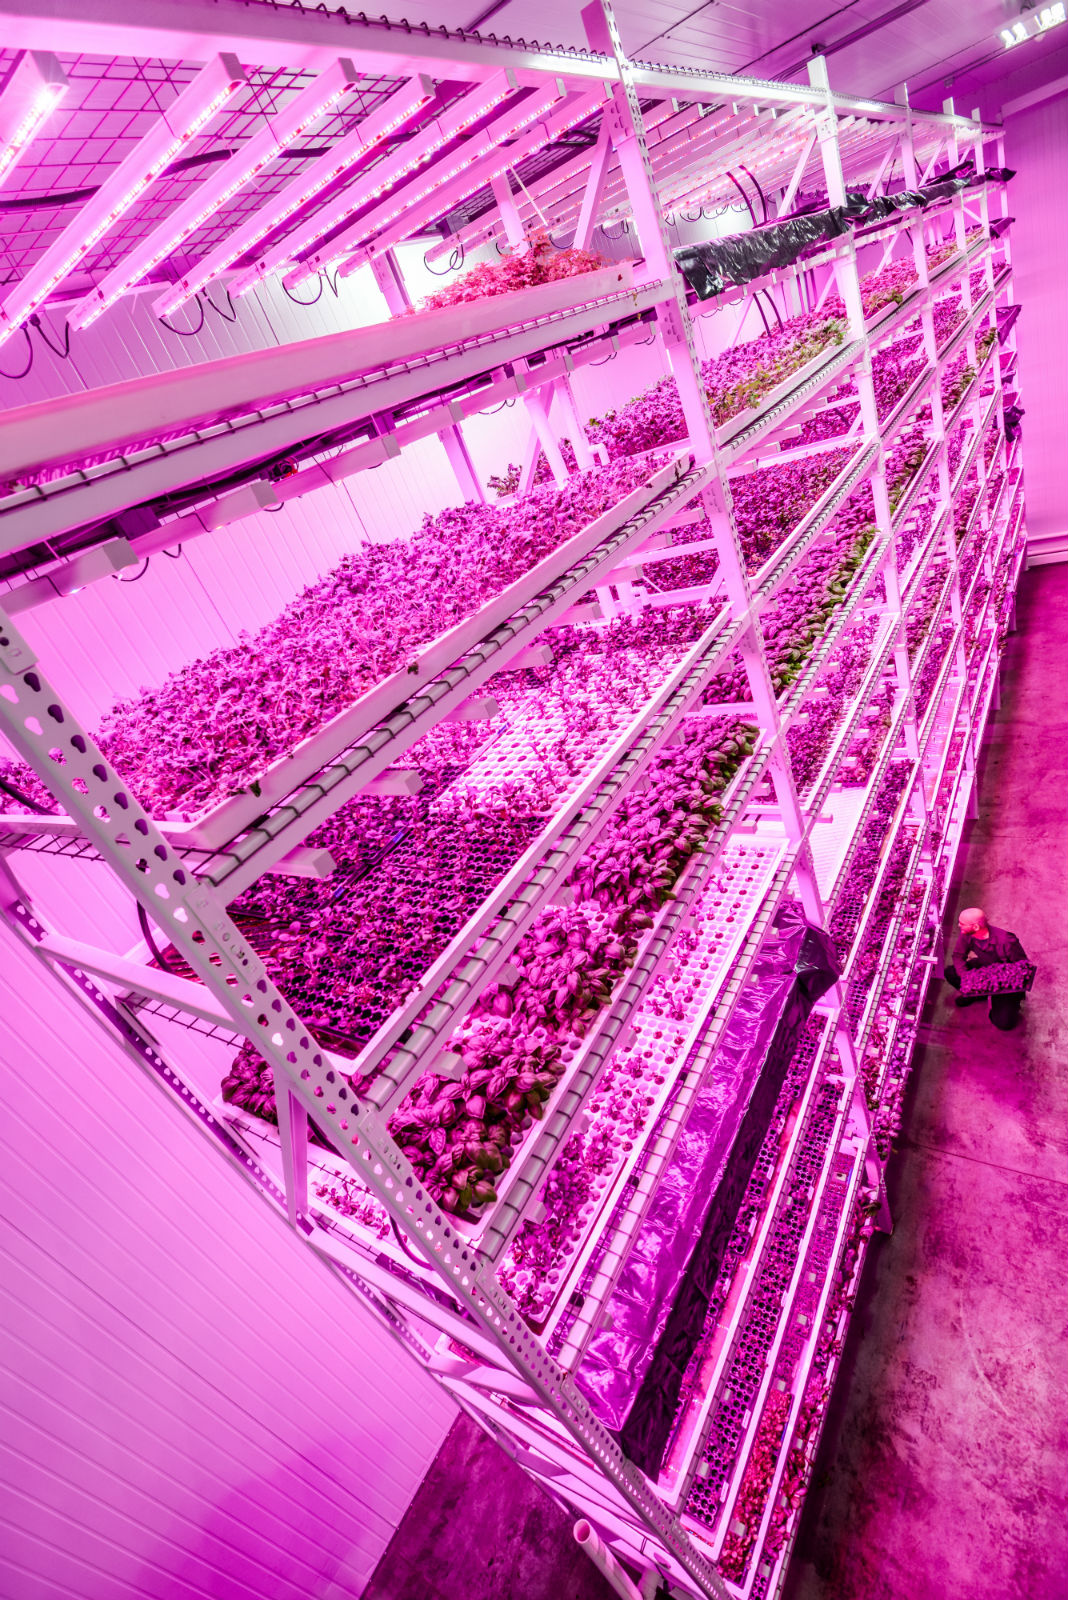 Monster Machines: This Huge Vertical Farm Glows Under Countless LED Suns